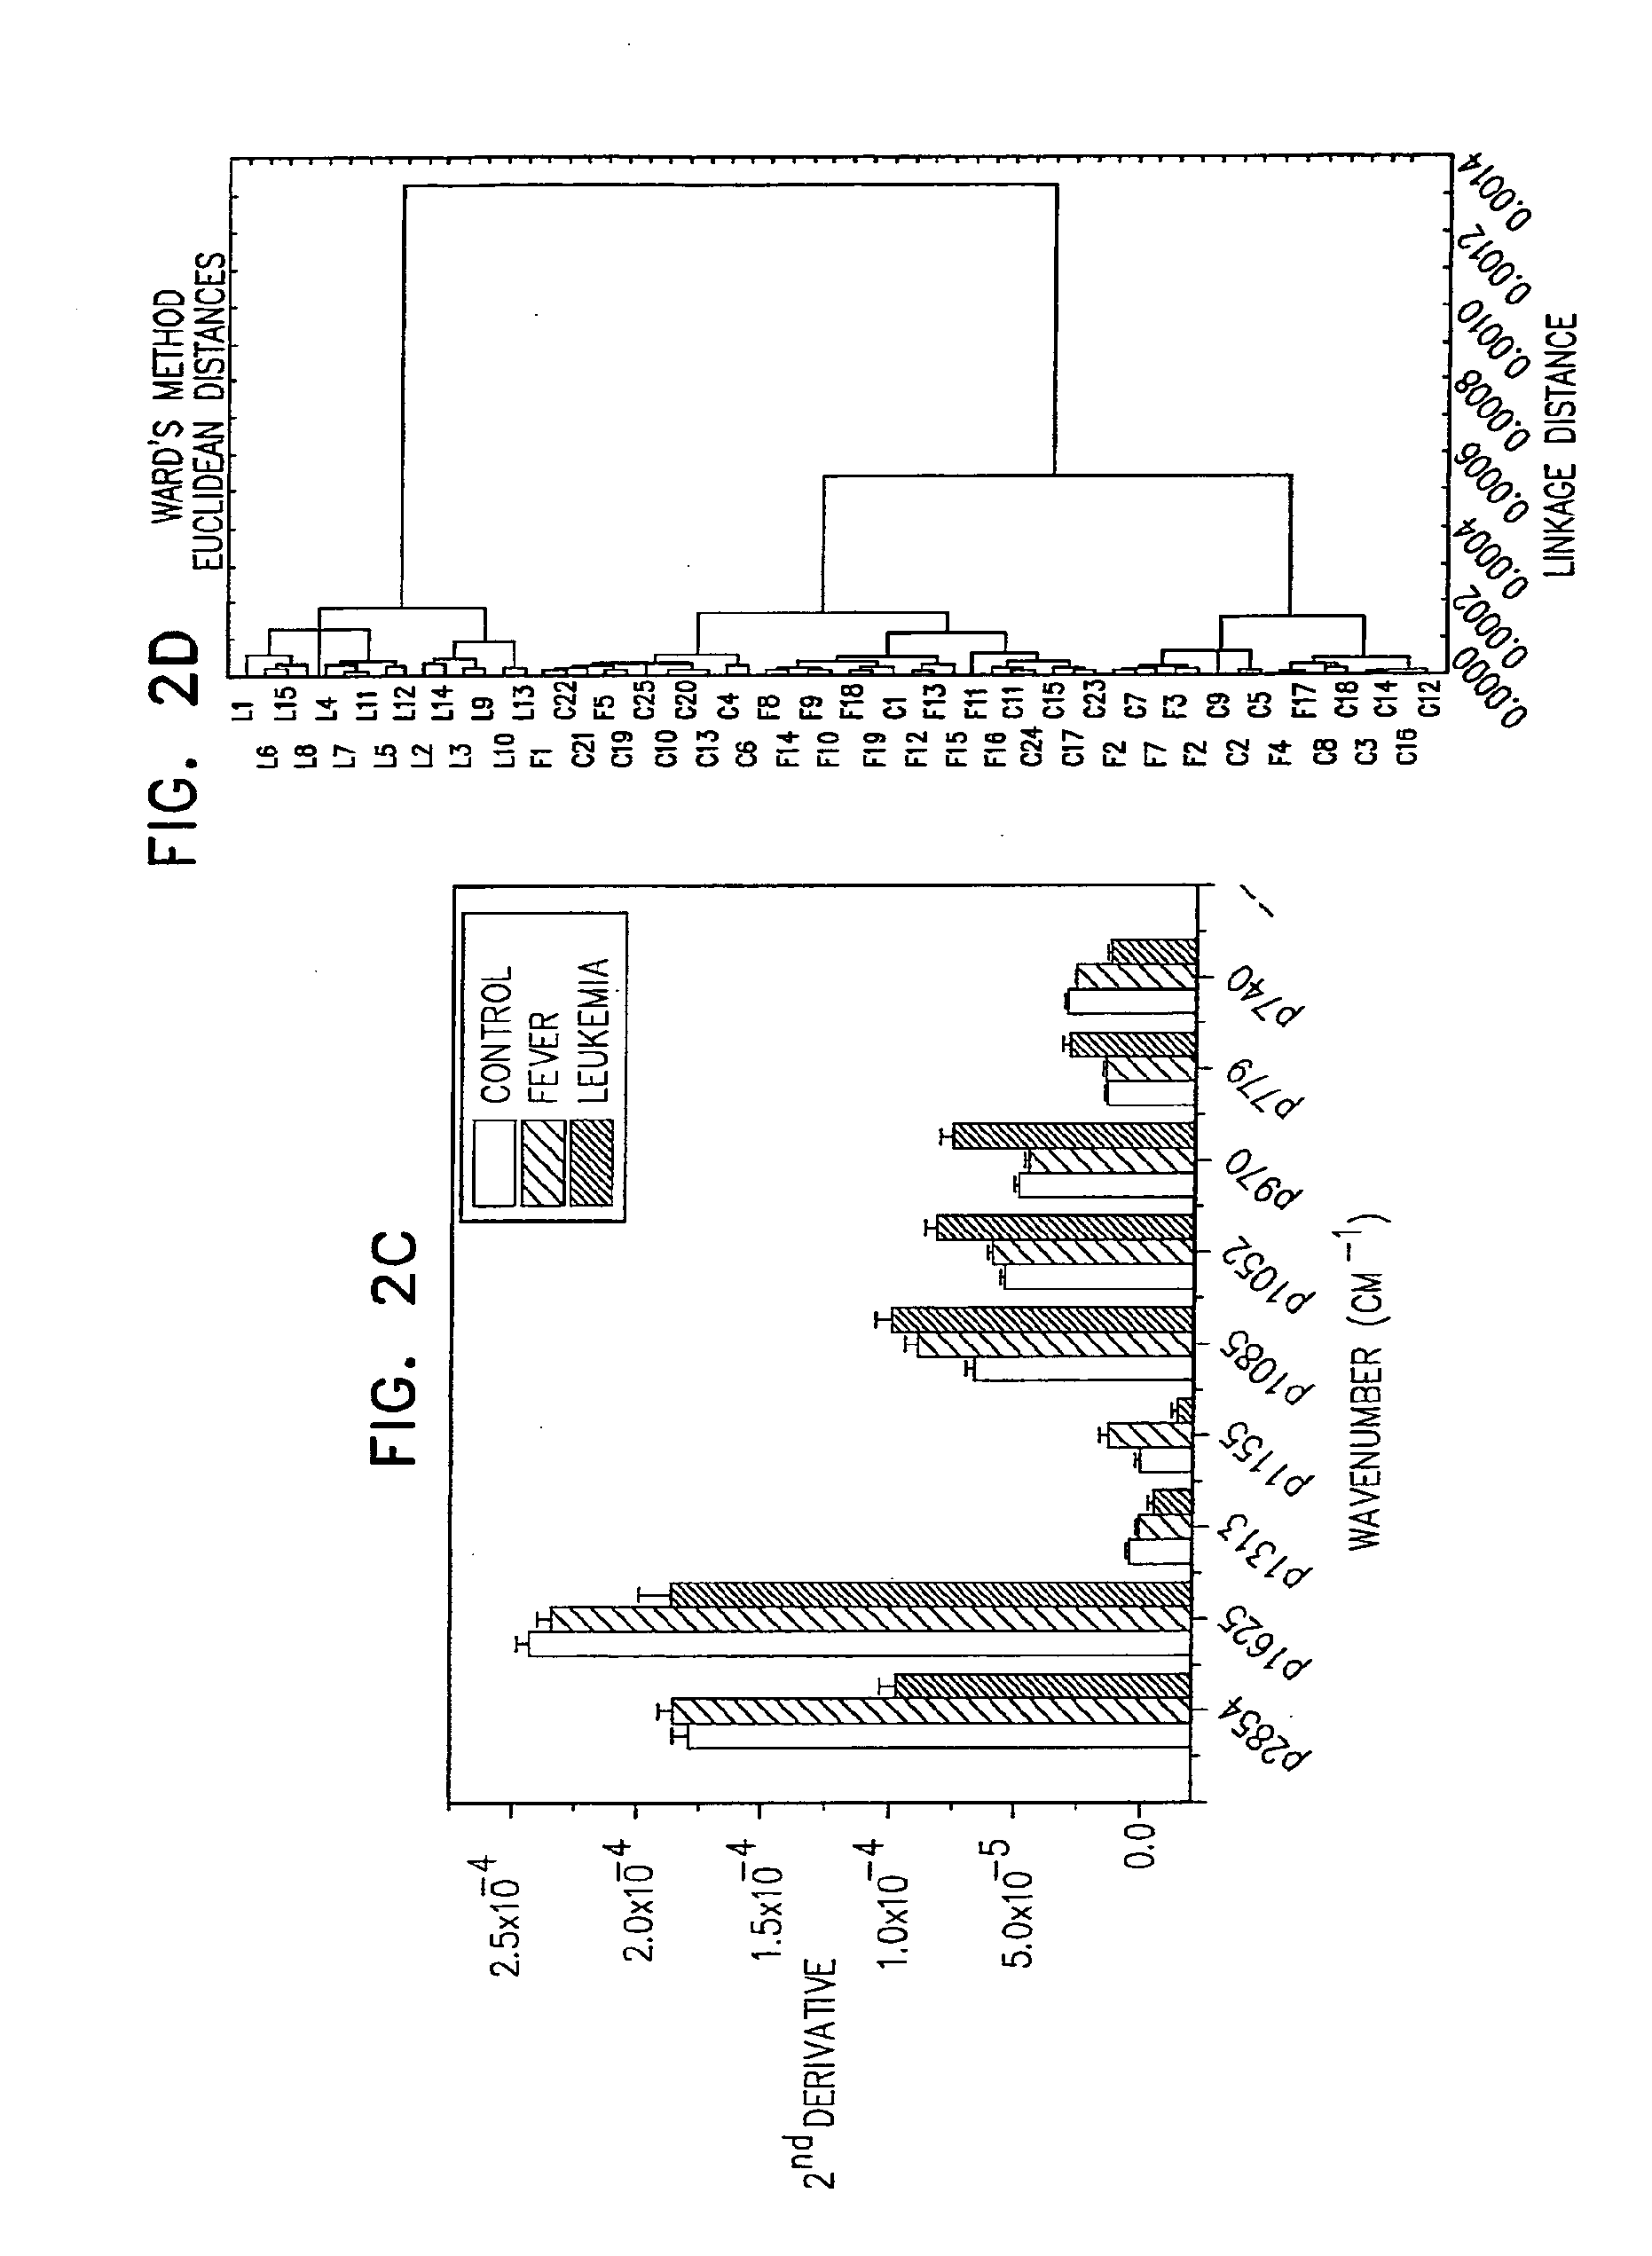 Method and system for detecting and monitoring hematological cancer